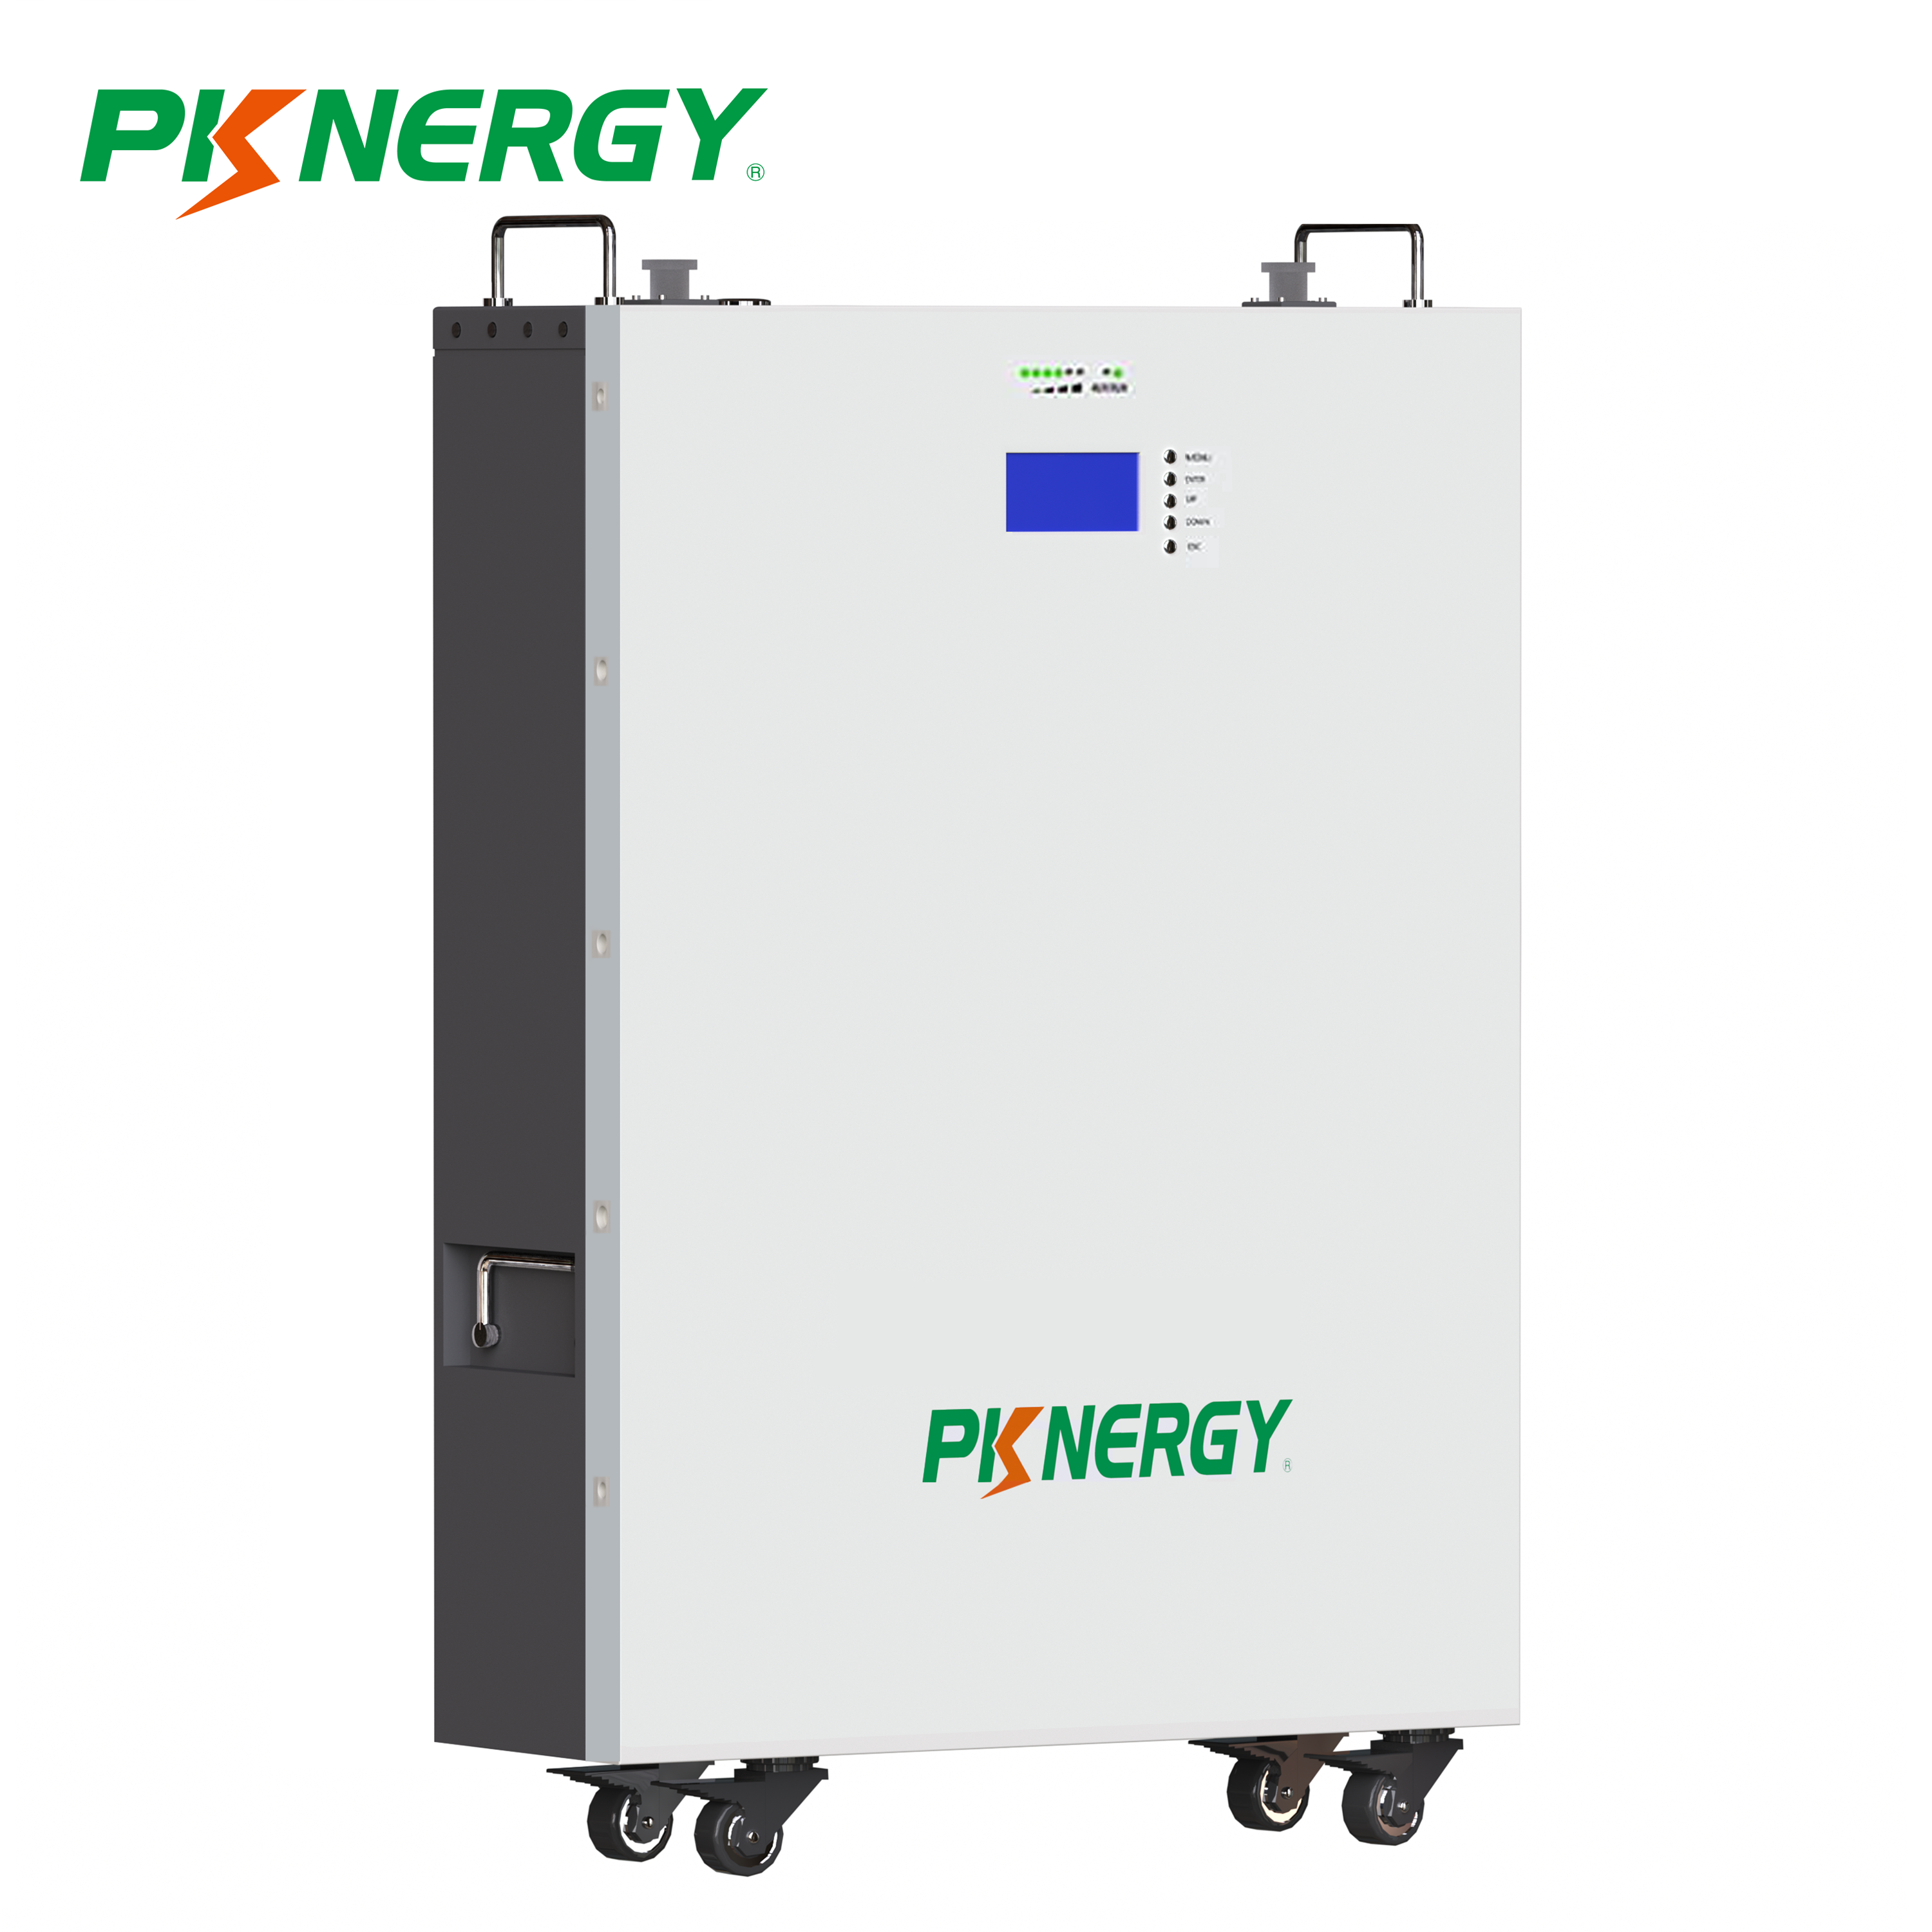 PKNERGY Powerwall 51.2V 300Ah 15Kwh LiFePO4 Battery with Roller for Home Energy Storage Featured Image